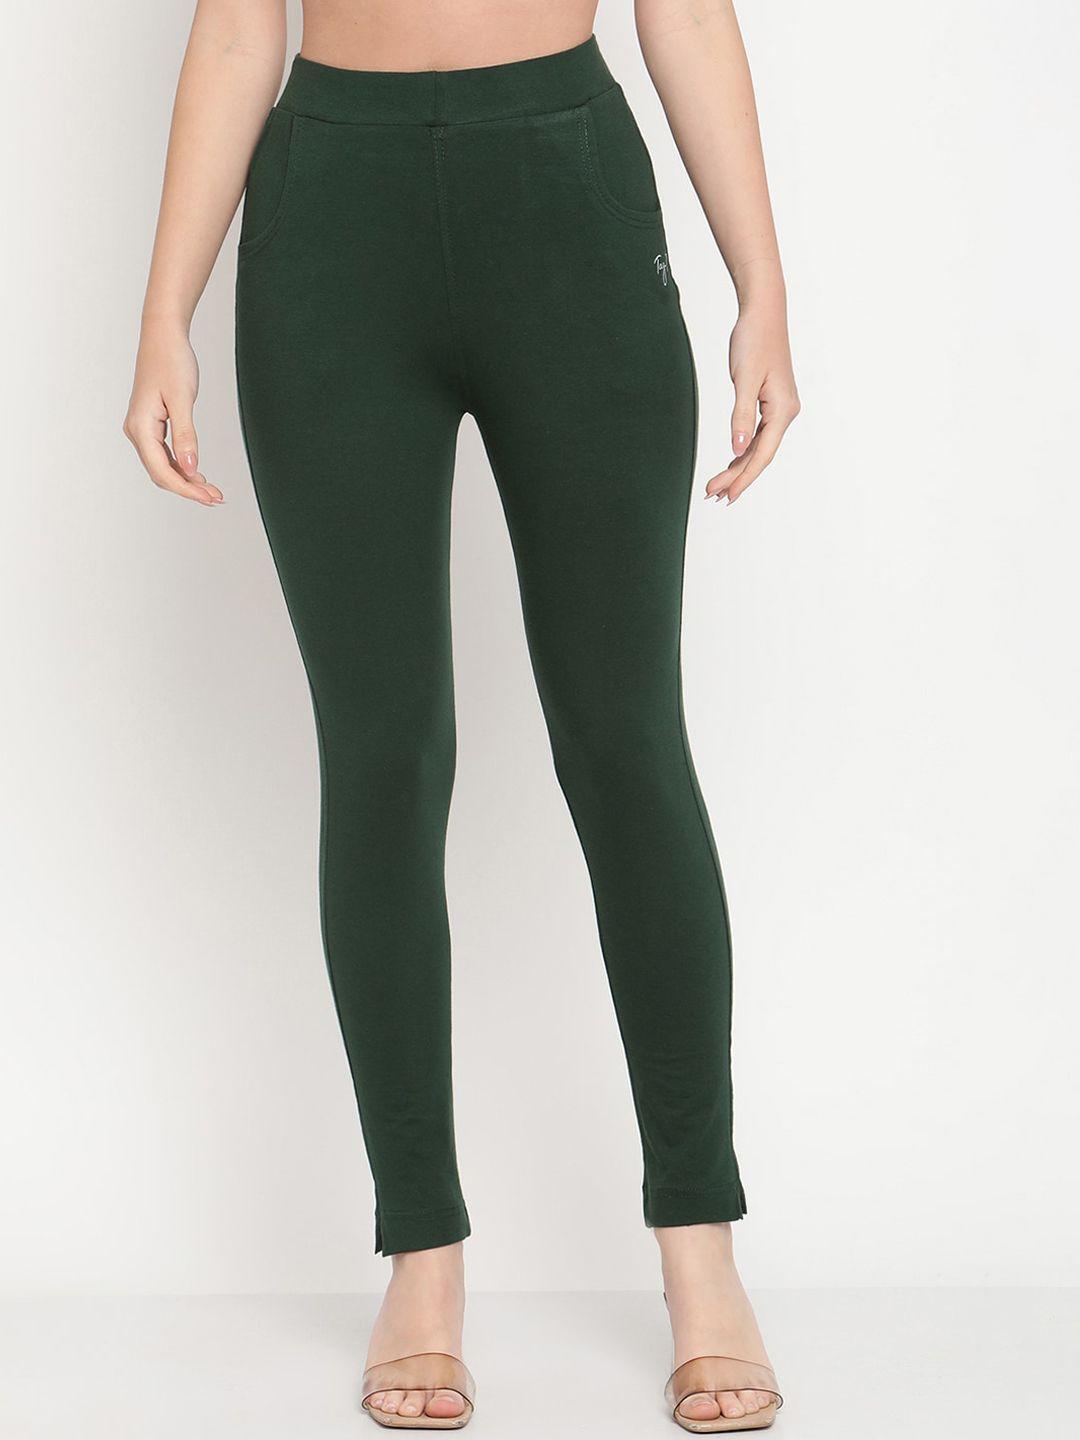 tag-7-women-green-solid-ankle-length-leggings